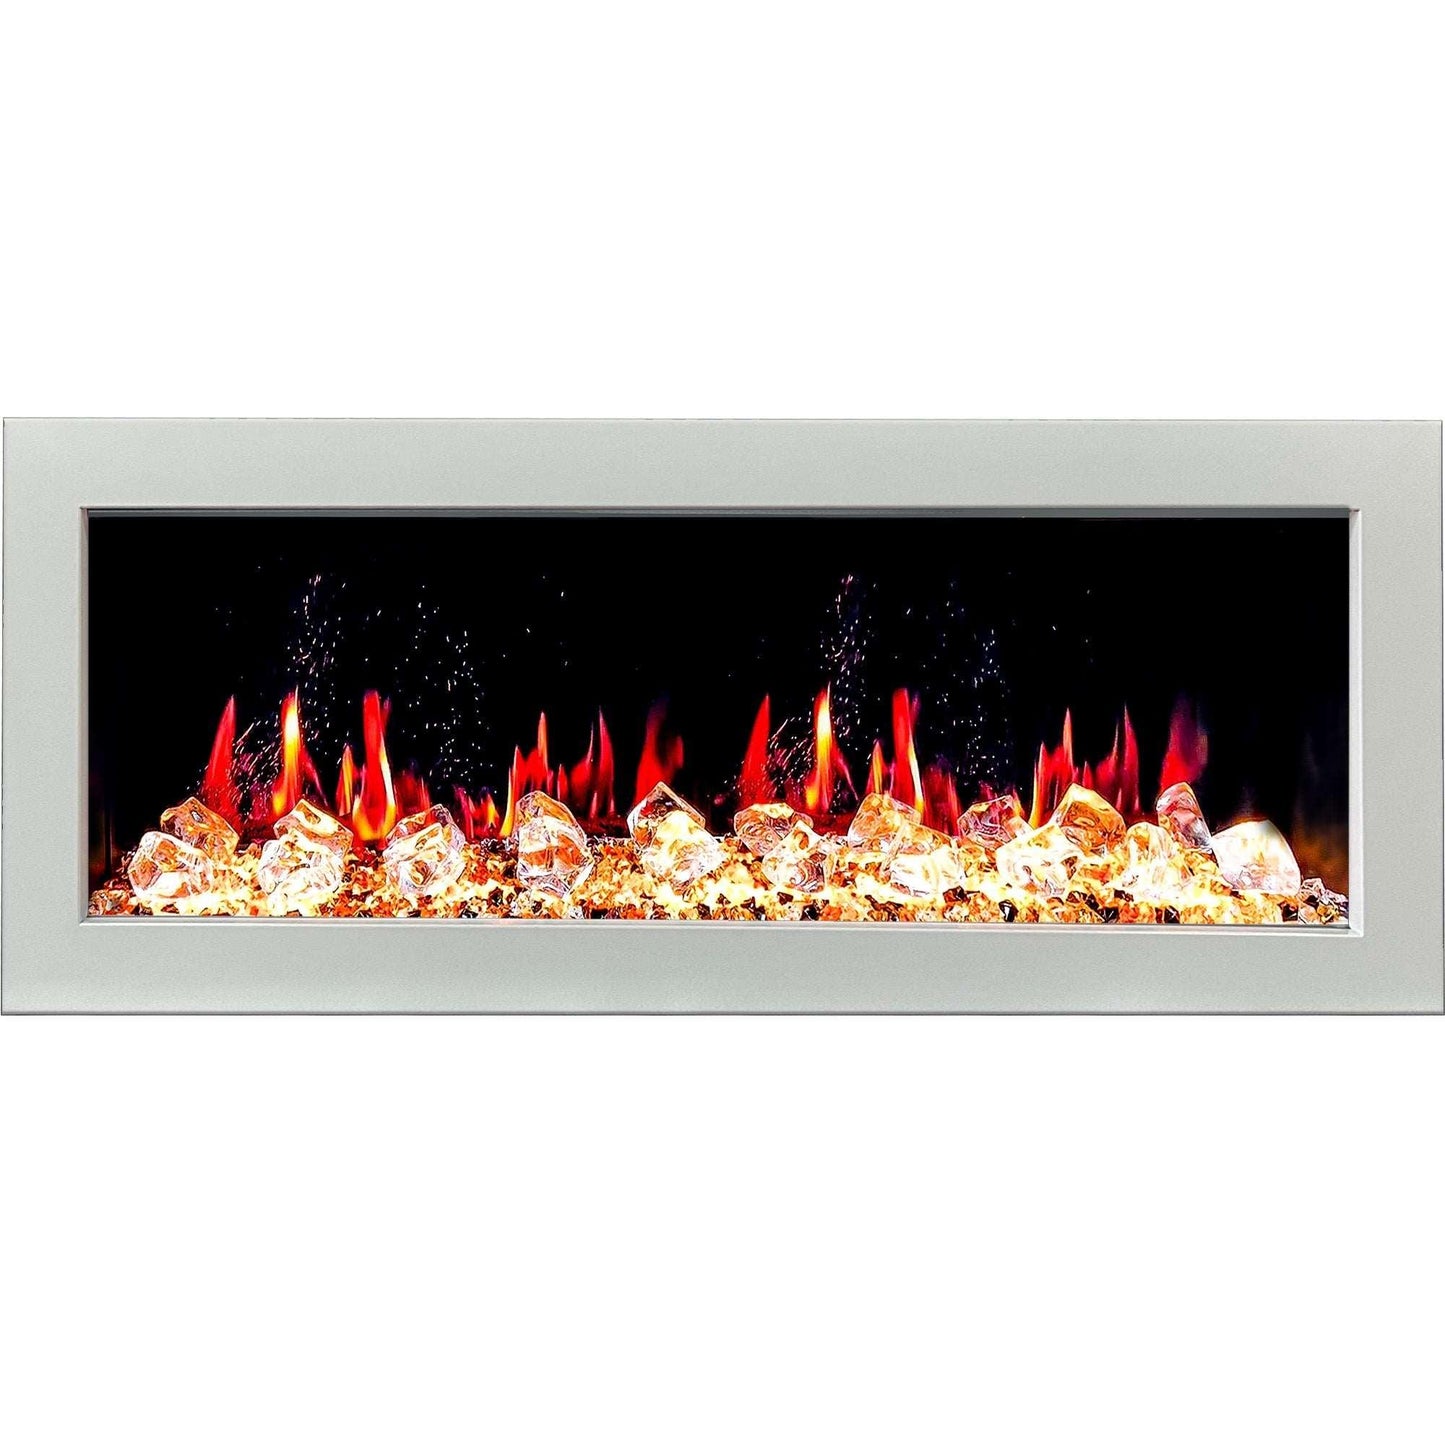 ZopaFlame™ 47" Linear Wall-mount Electric Fireplace - WC17488X - ZopaFlame Fireplaces